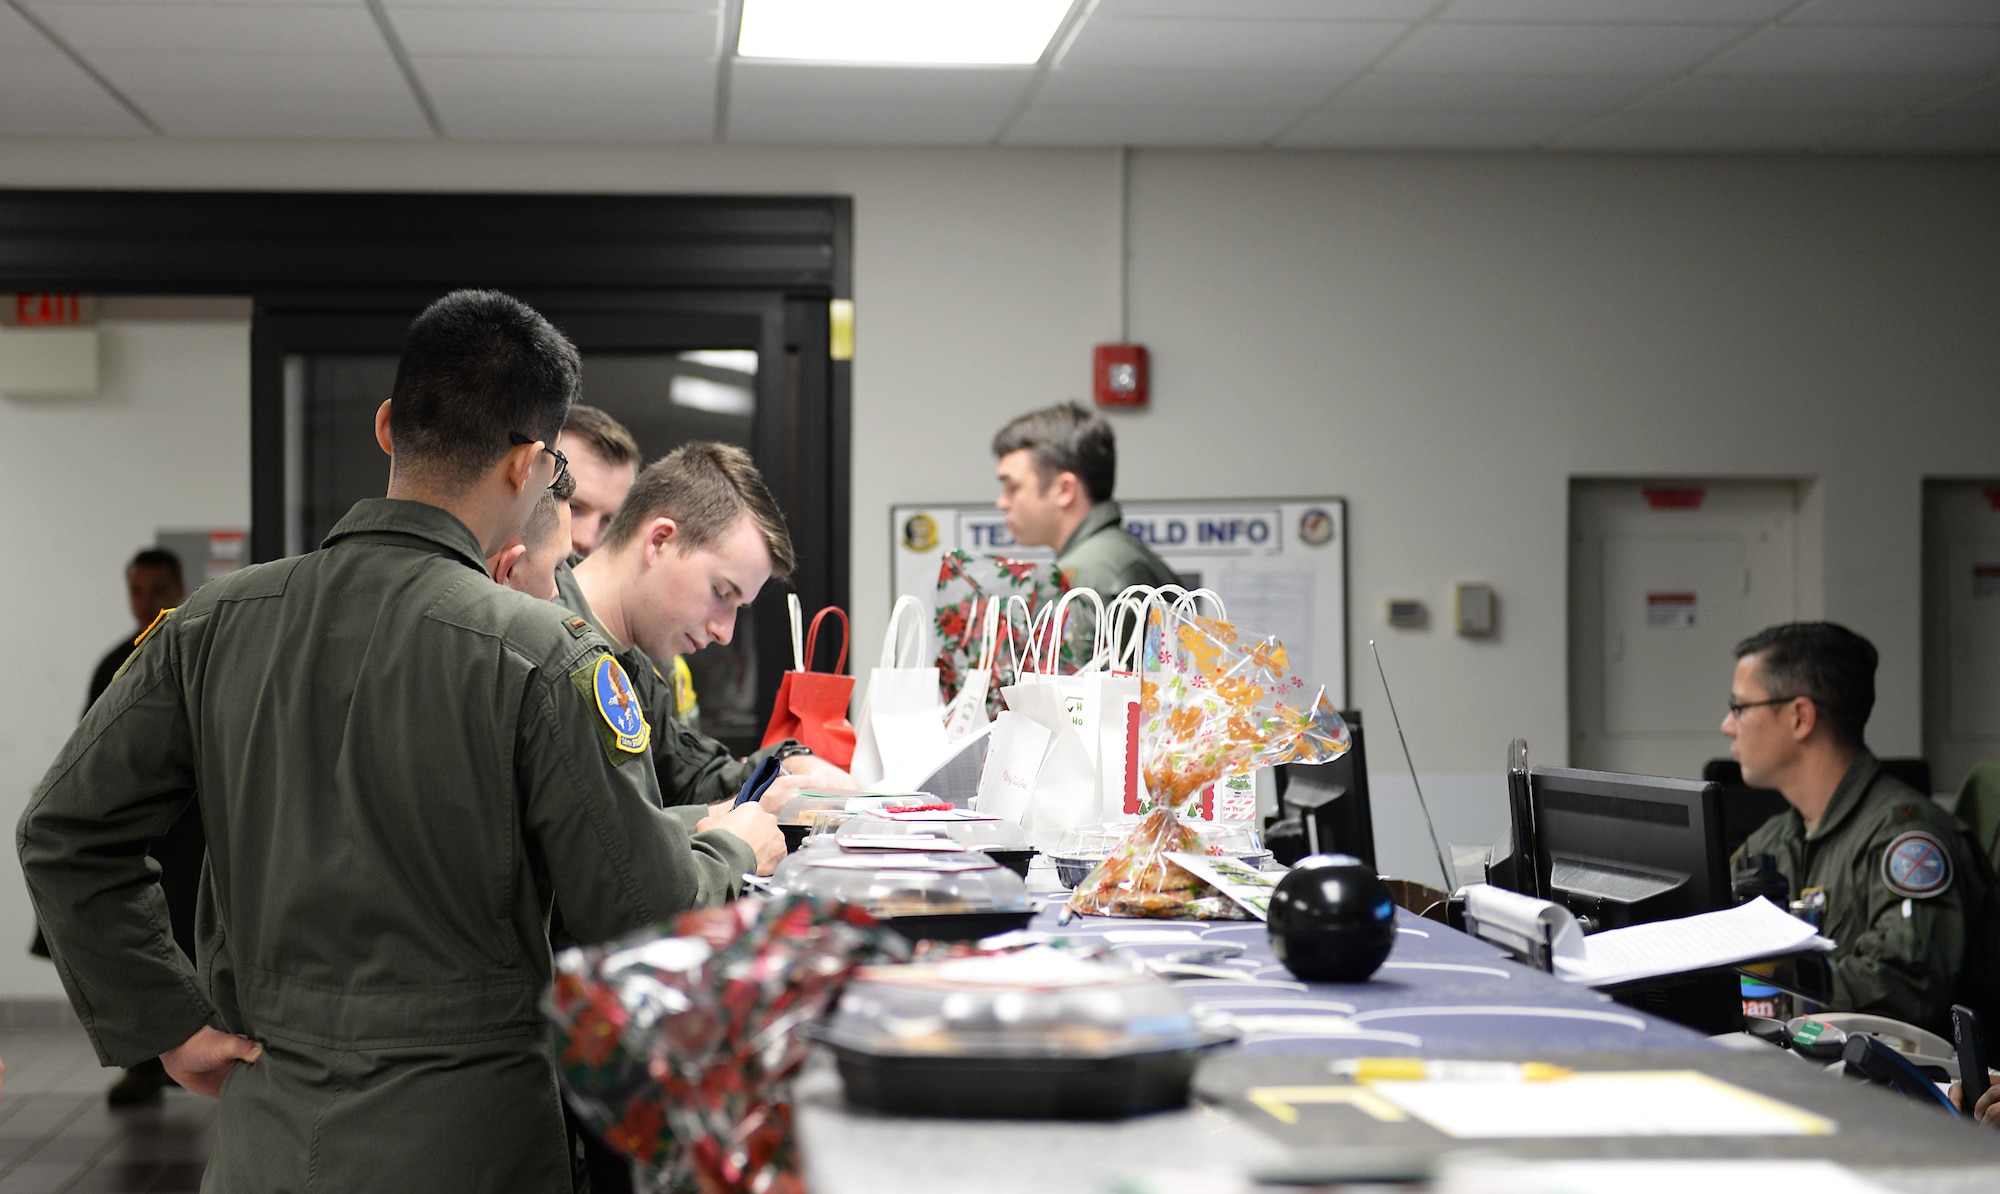 Bags and tins of cookies sit along the T-6 Texan II step desk during the Columbus Spouses Club Cookie Drive Dec. 17, 2019, on Columbus Air Force Base, Miss. Donations and other support were provided by Columbus community members and local businesses as well as base community members, providing nearly 700 dozen cookies to Airman. (U.S. Air Force photo by Airman 1st Class Hannah Bean)